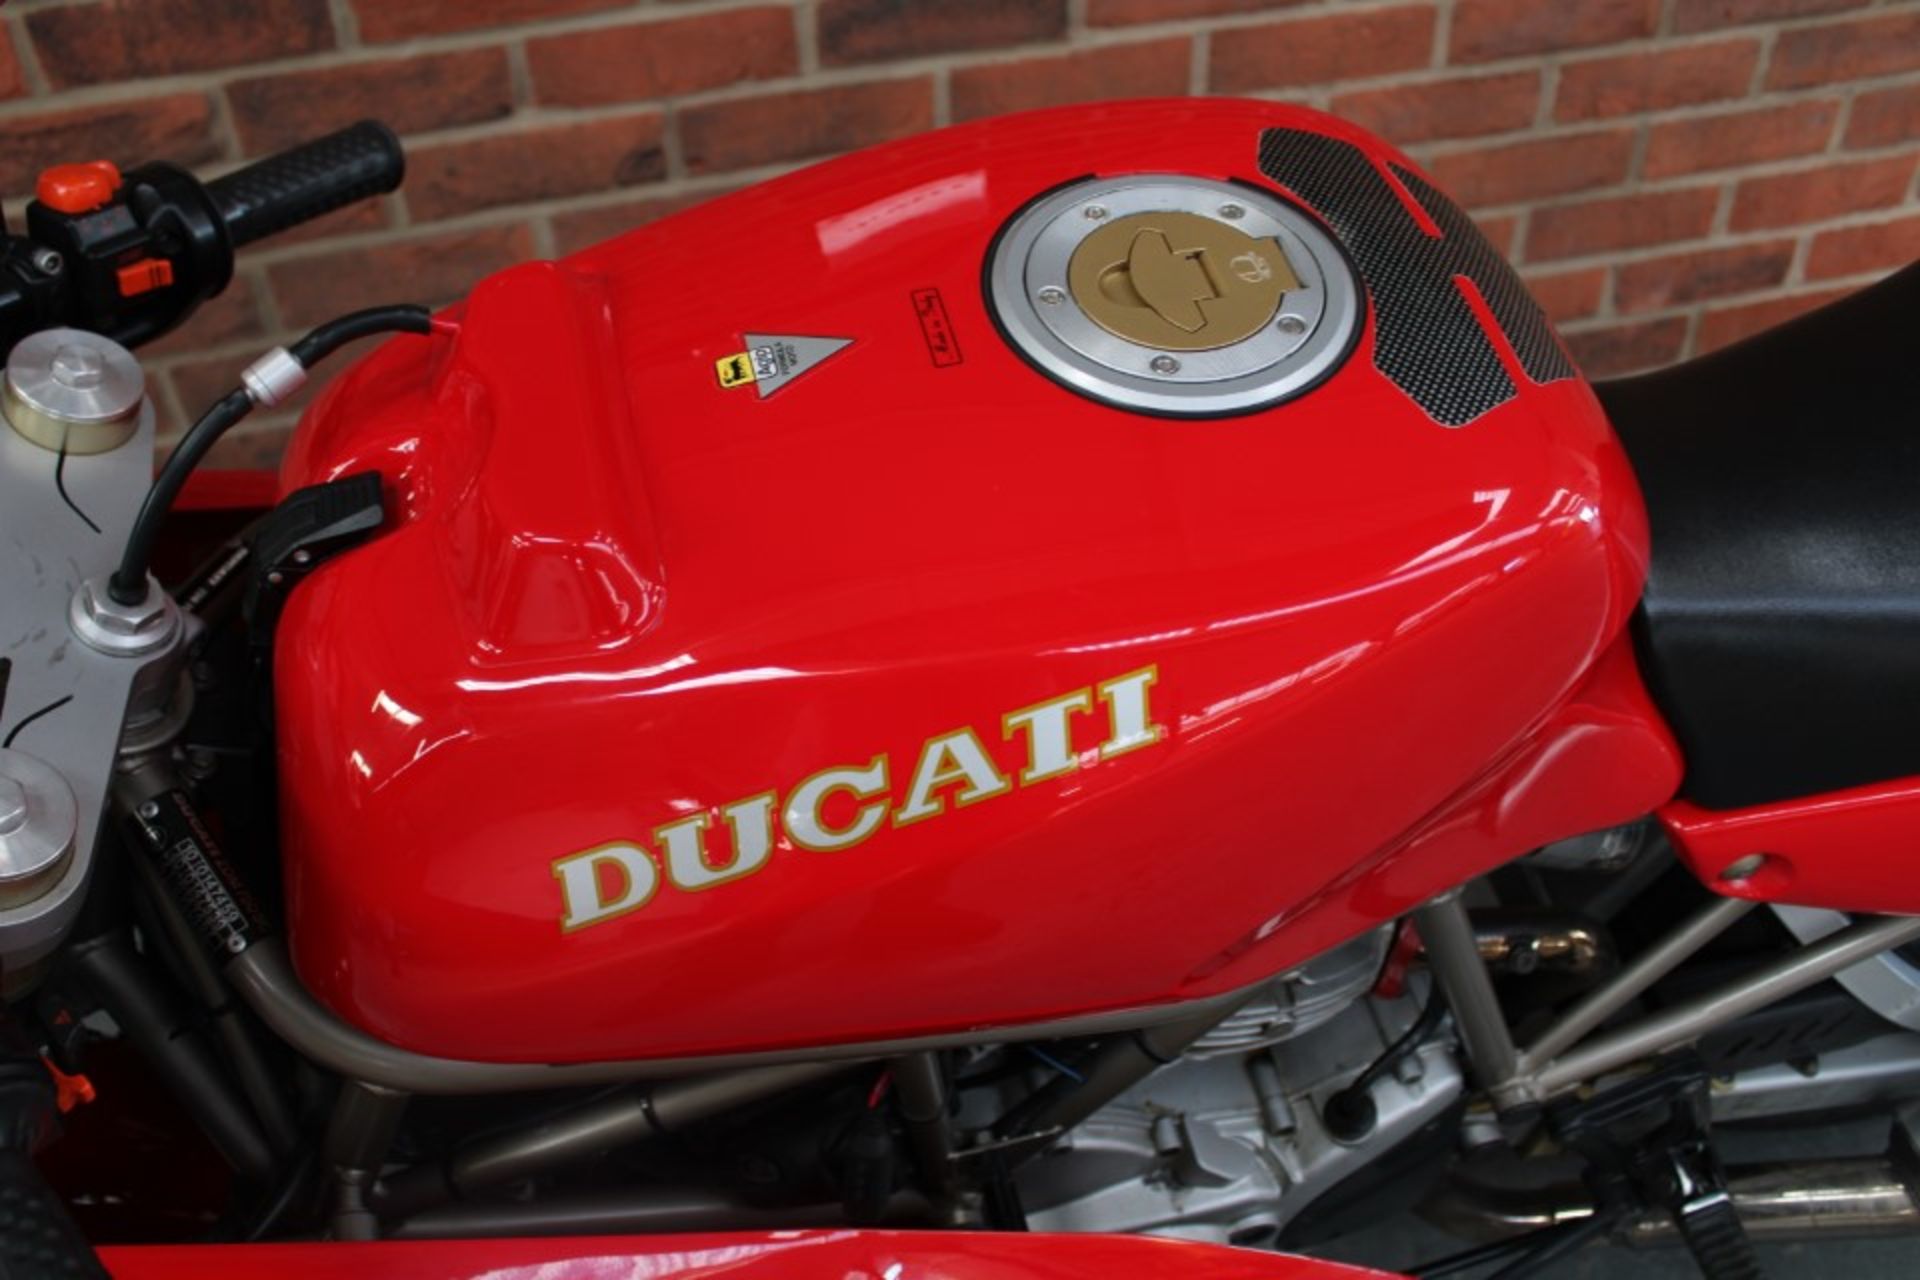 1994 Ducati 750 SS Supersport - Image 8 of 16